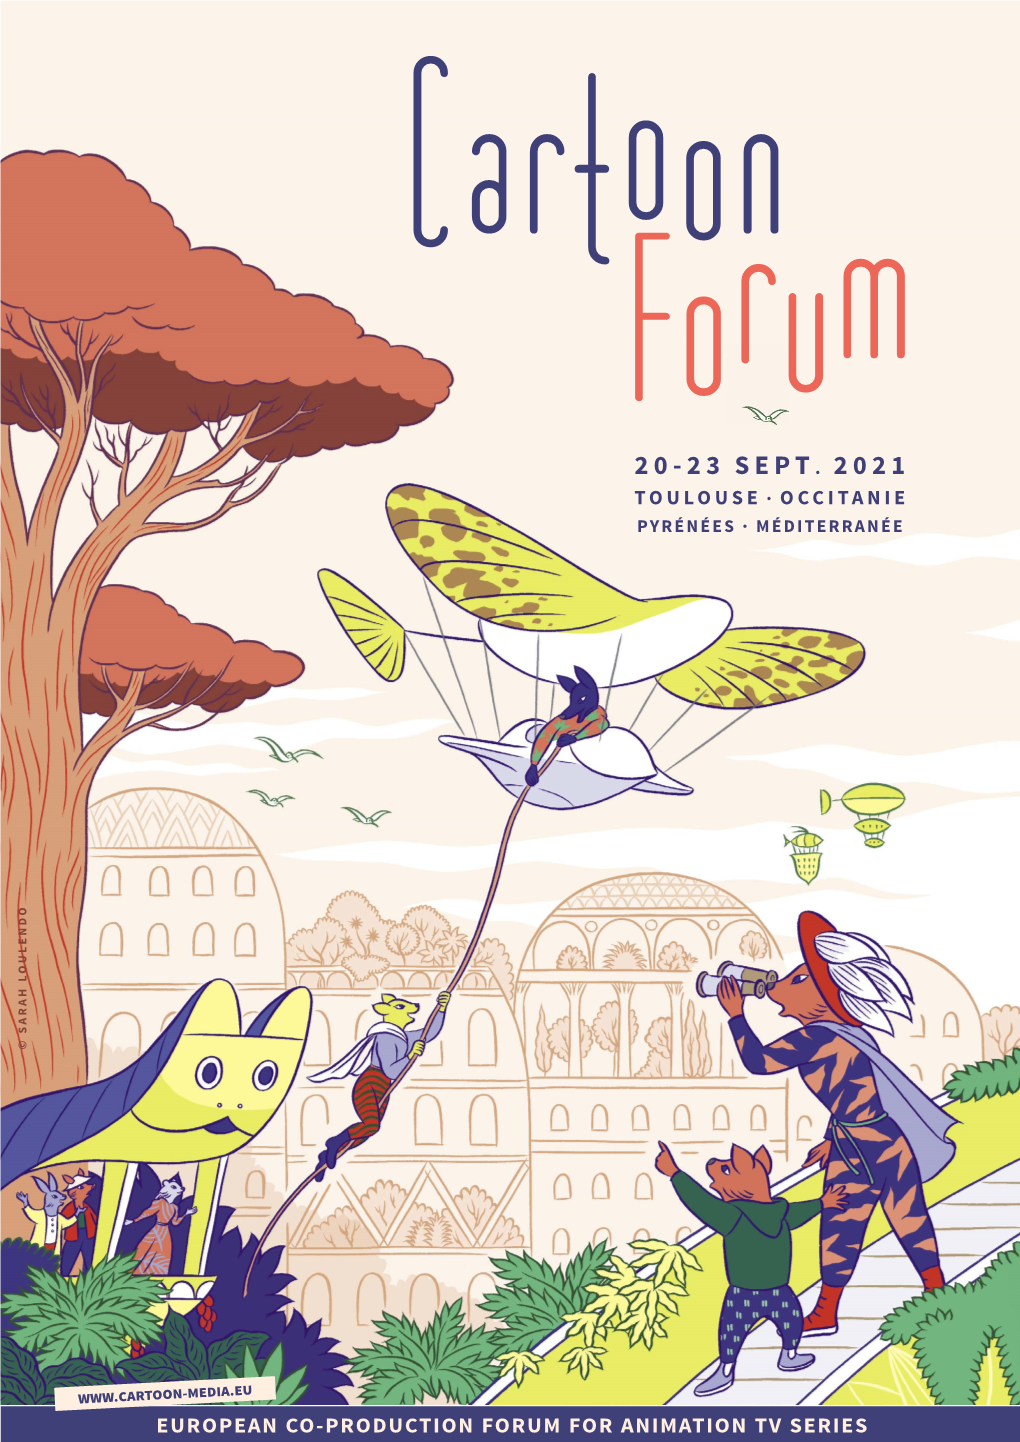 Cartoon Forum 2021 in Toulouse, Where Projects Come to Life